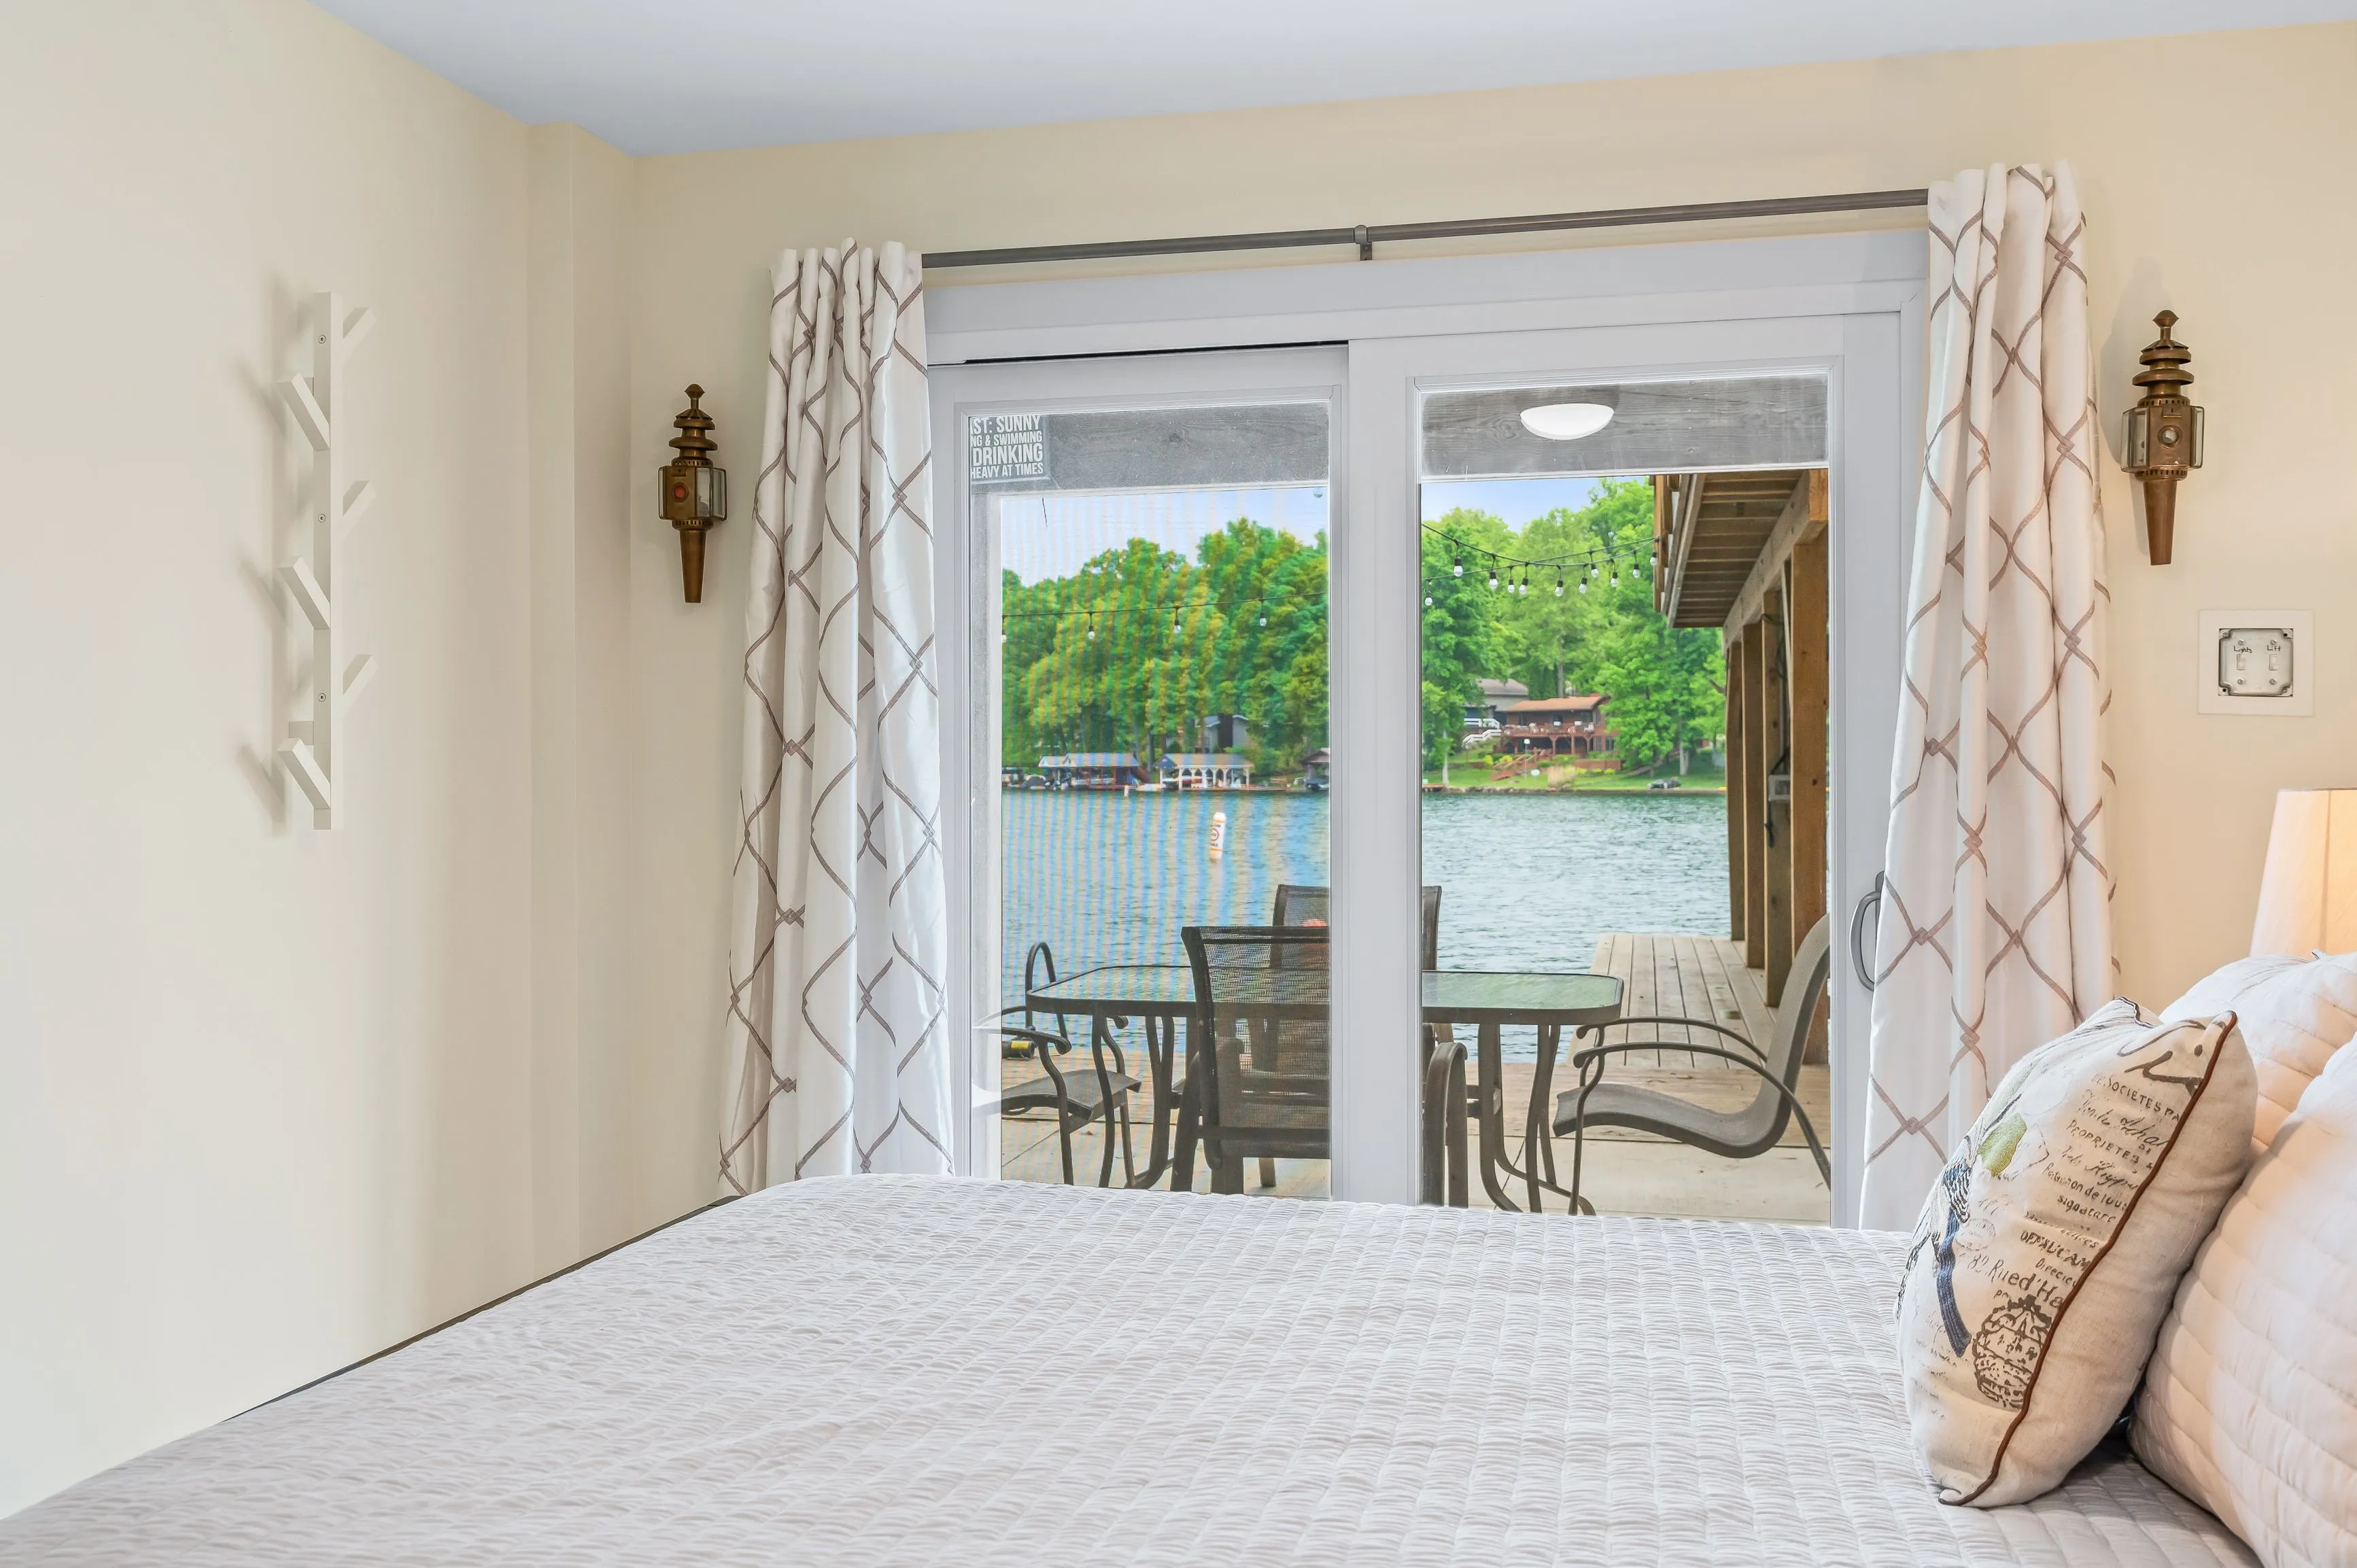 Lake view from a cozy bedroom with glass doors leading to outdoor patio with seating area.